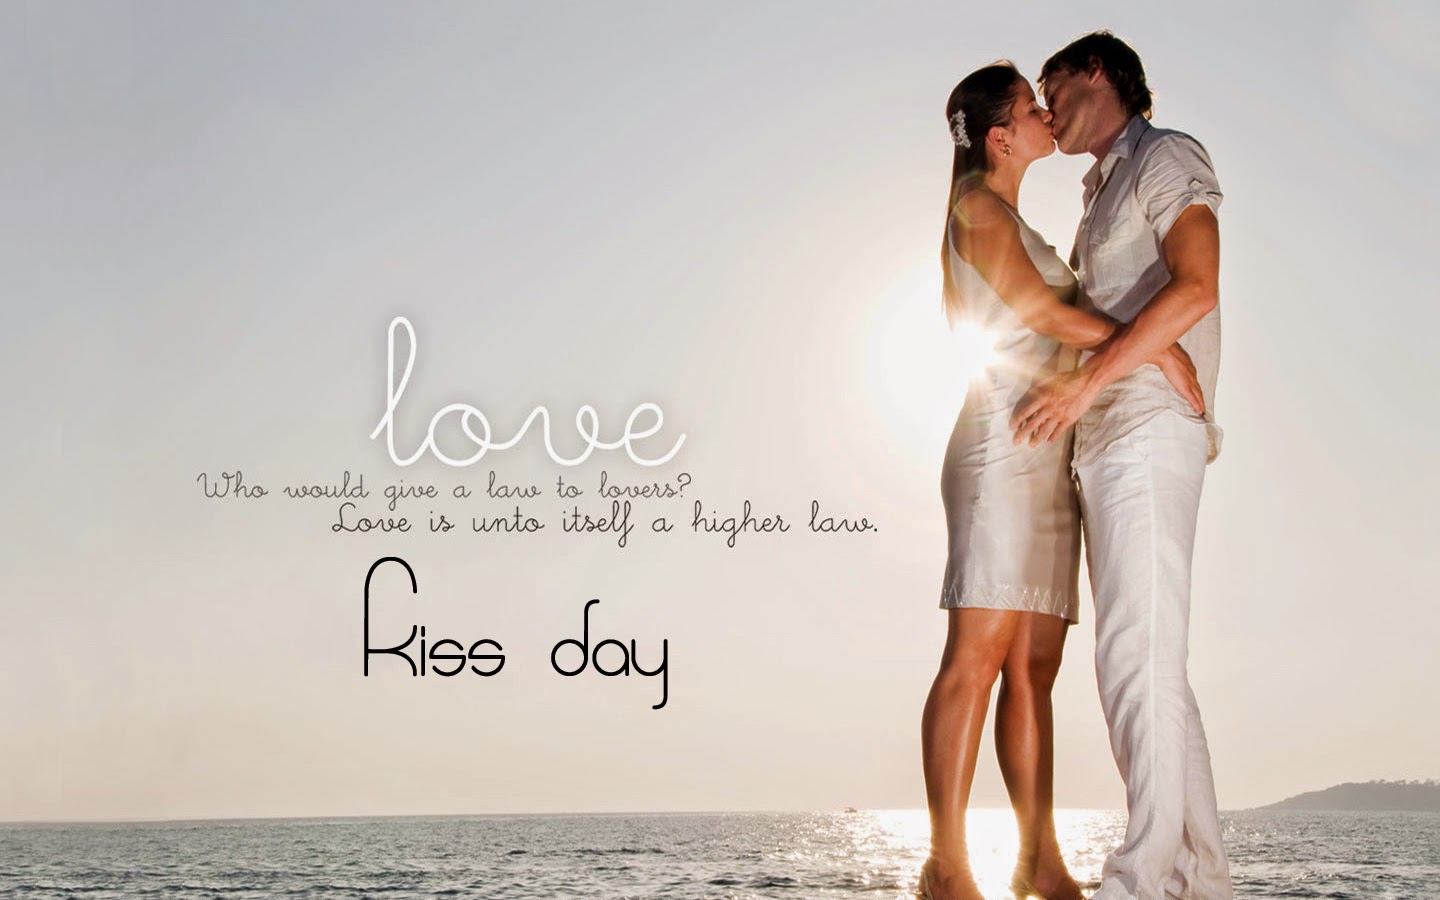 Happy Kiss Day Messages, Sms, Wallpapers For Boyfriend - Romantic Easter Love Quotes , HD Wallpaper & Backgrounds